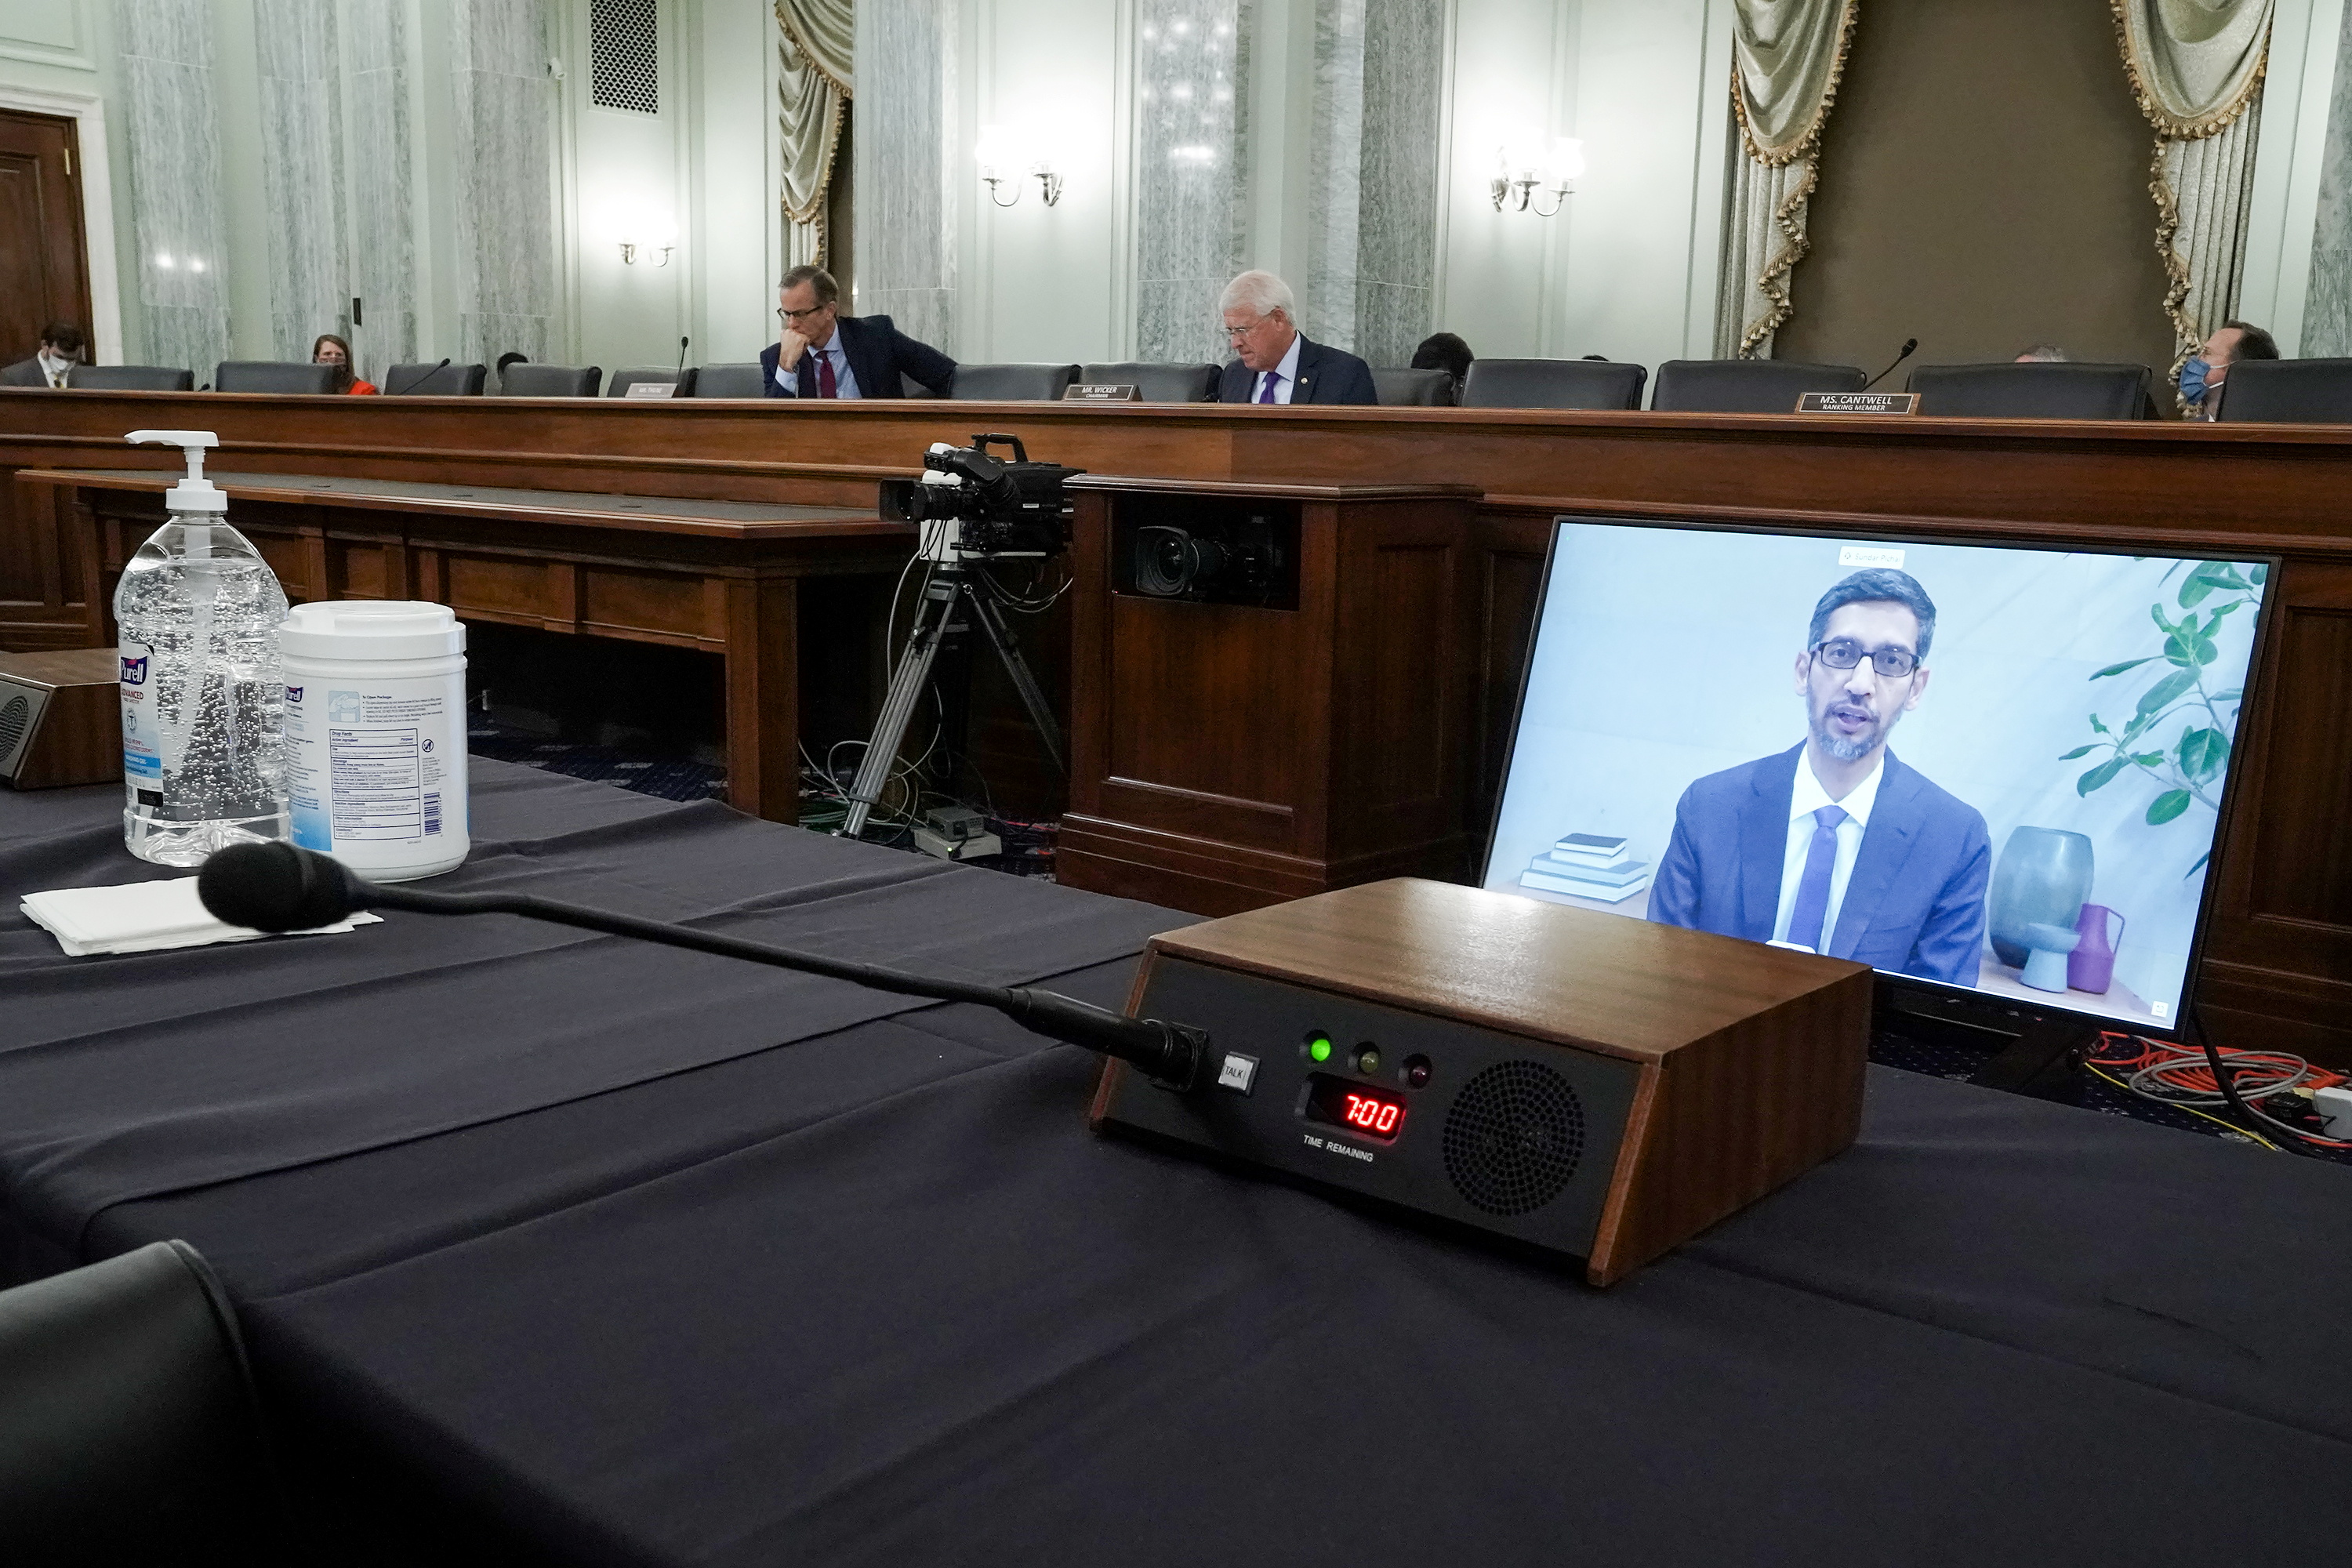 CEO of Google and Alphabet Sundar Pichai testifies remotely during the Senate Commerce, Science, and Transportation Committee hearing 'Does Section 230's Sweeping Immunity Enable Big Tech Bad Behavior?', on Capitol Hill in Washington, DC, U.S., October 28, 2020. Greg Nash/Pool via REUTERS